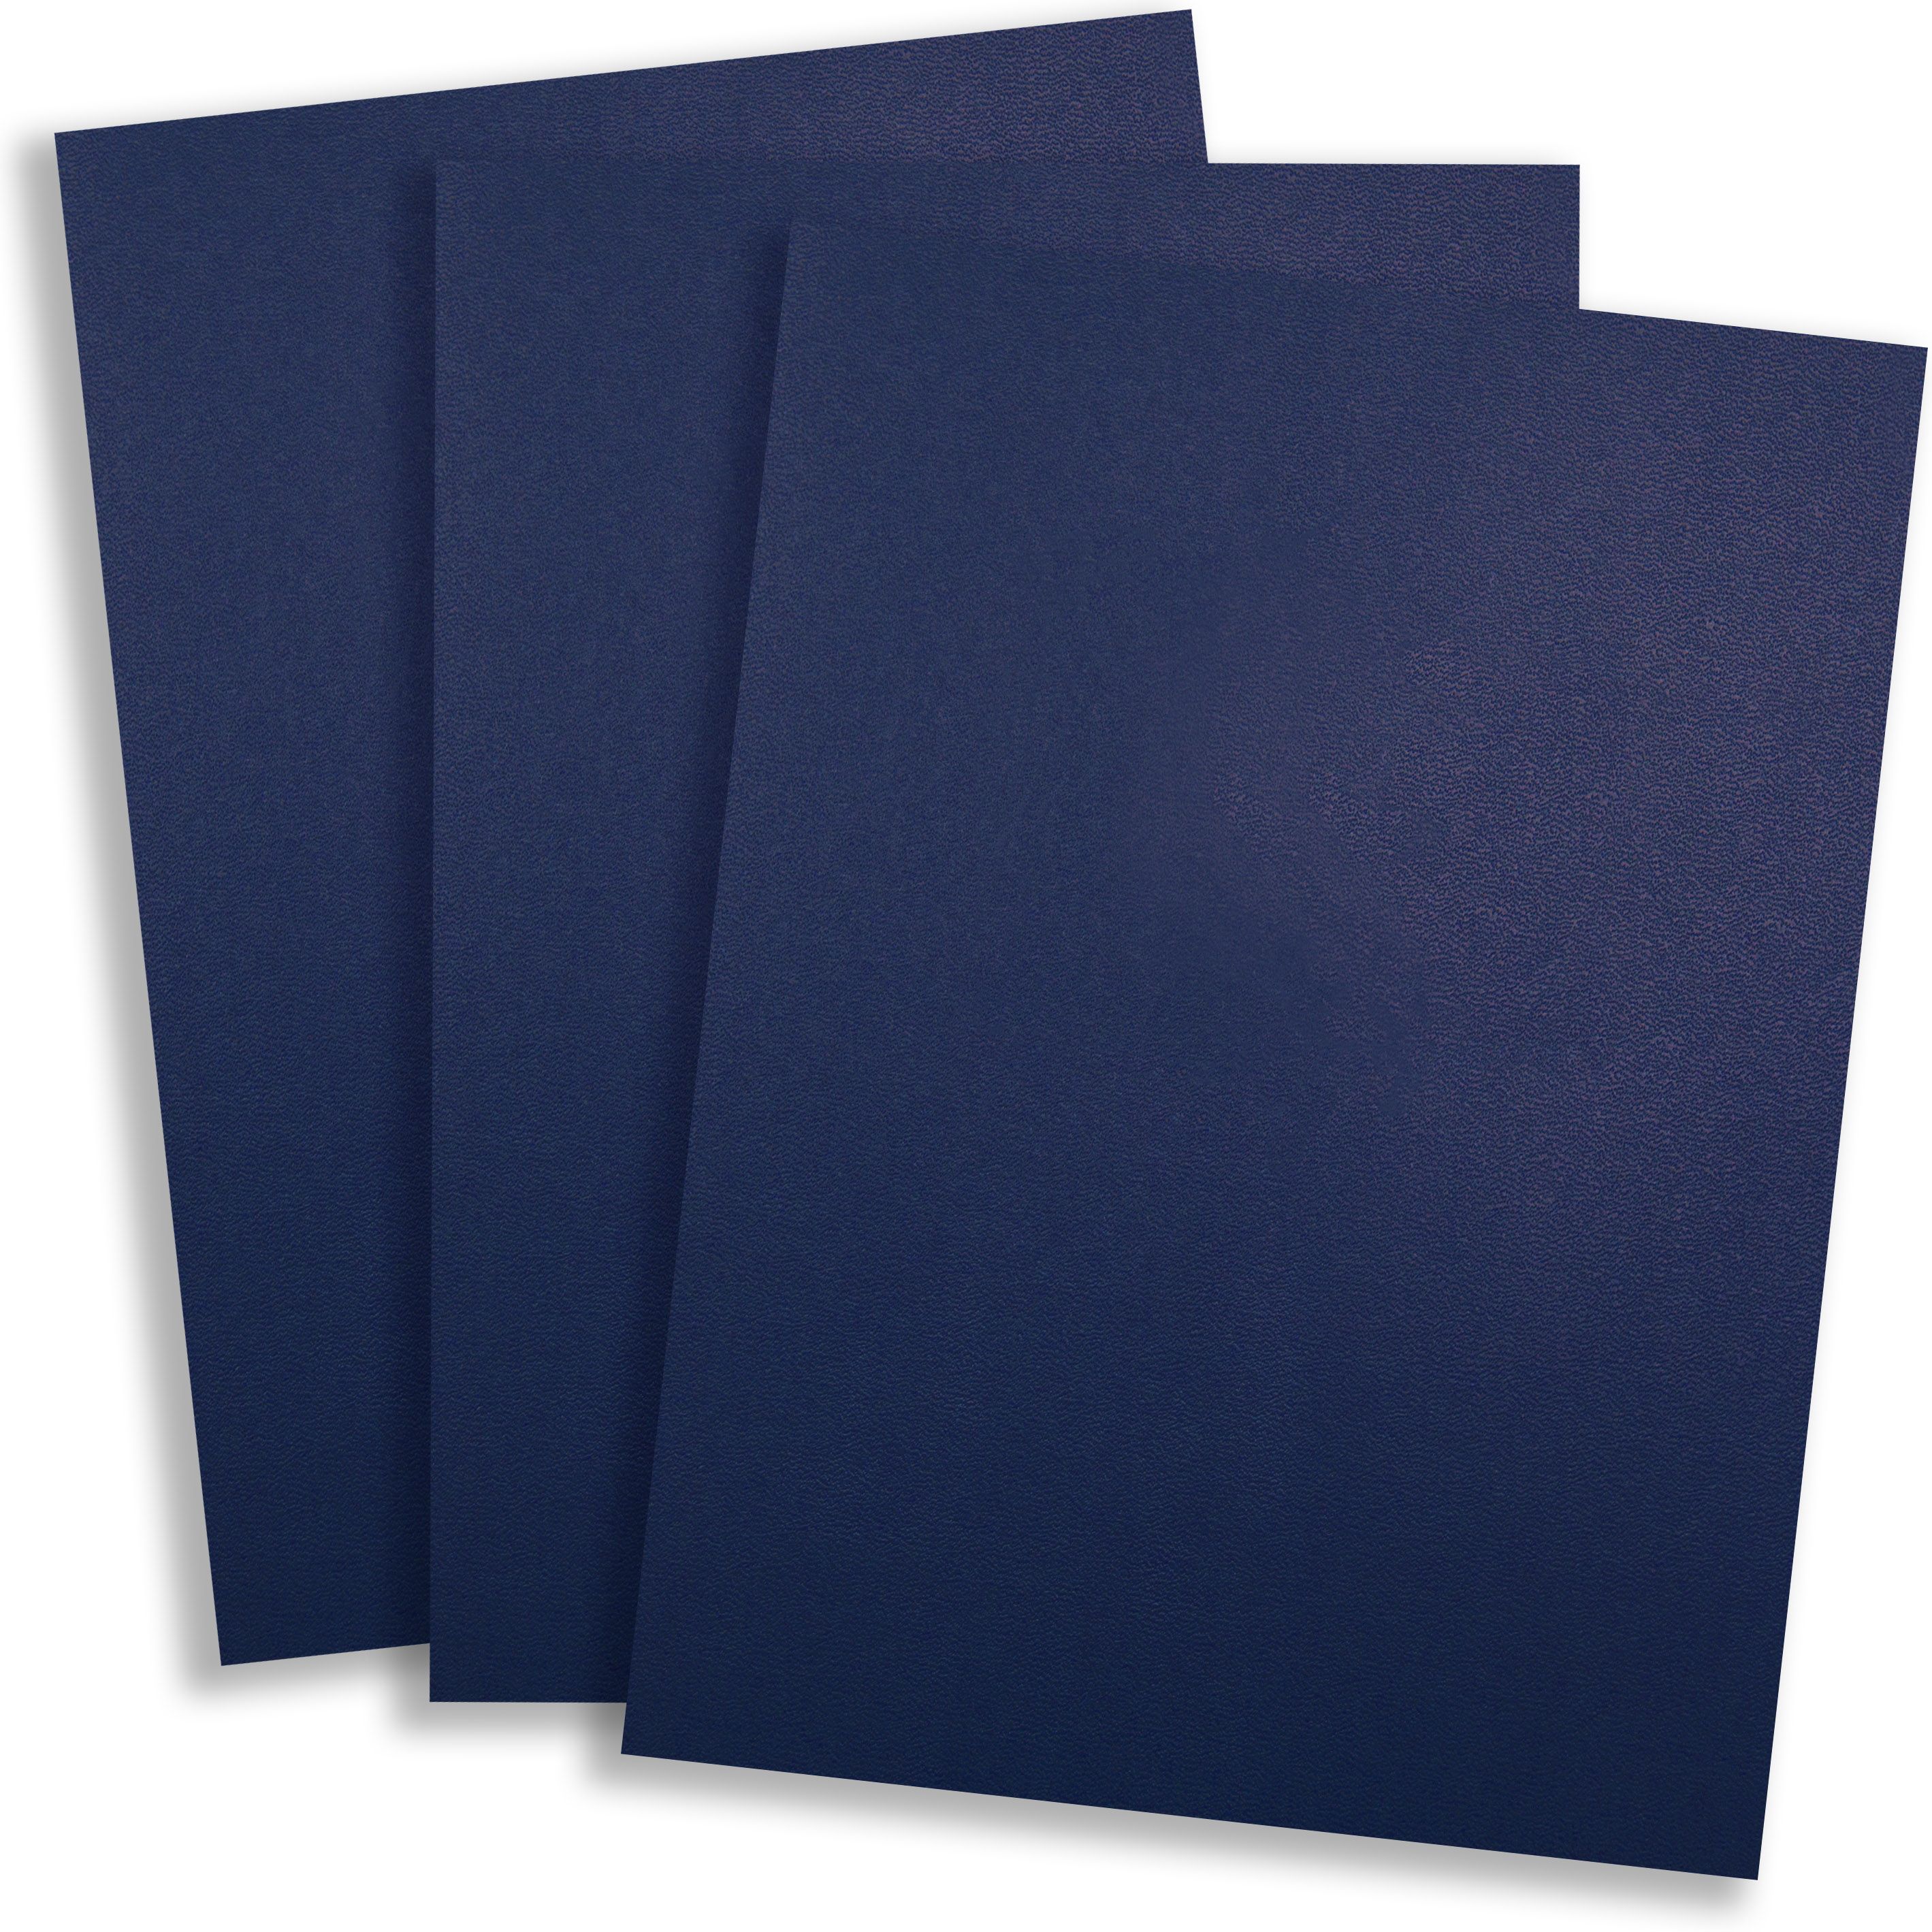 Royal Blue/Navy 11" x 17", Vinyl Report Covers [No Window, Square Corners, Unpunched] (100 Covers / Box) 